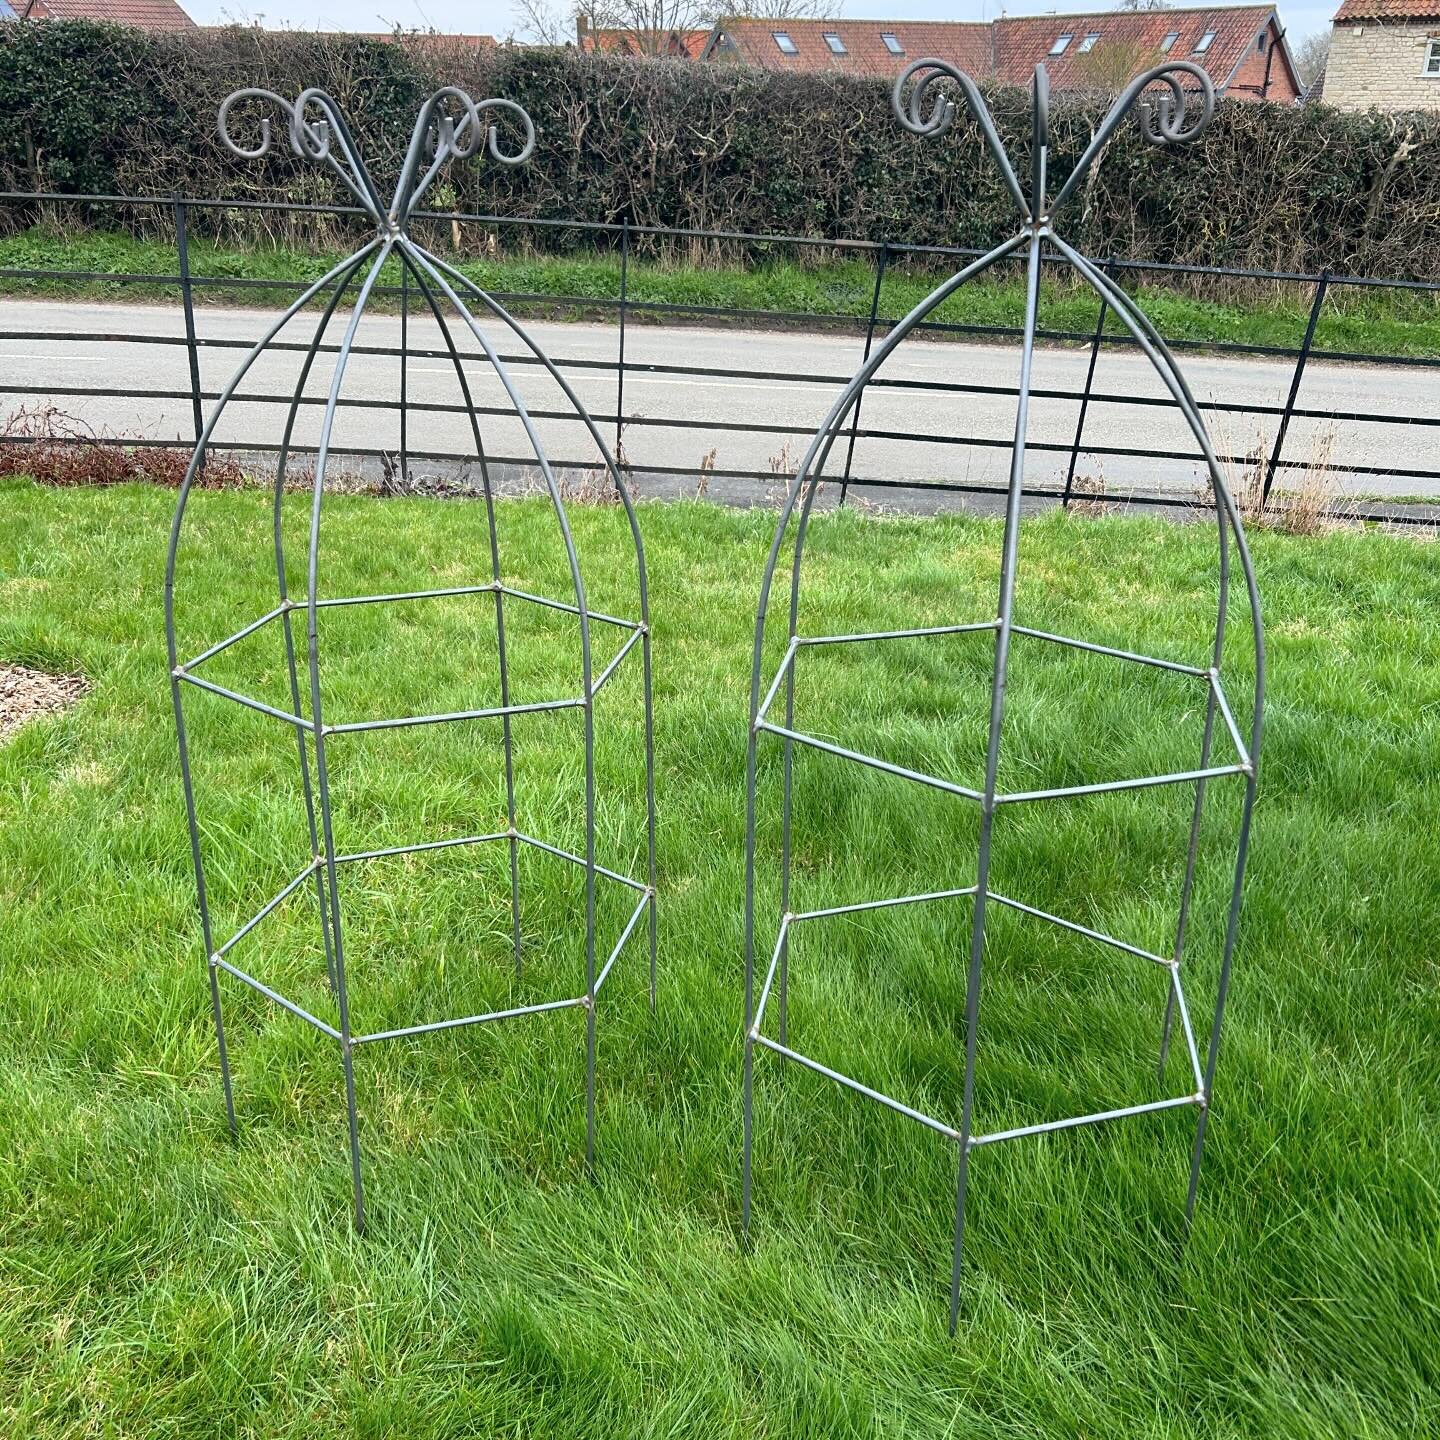 I decided to make a couple of half height towers with hexagonal rings this evening. Not sure if I prefer hex or circular rings 🤔

#lincolnshireplantsupports #lincsplantsupports #plantsupport #smallbusiness #smallgardenspace #garden #gardendesign #ga